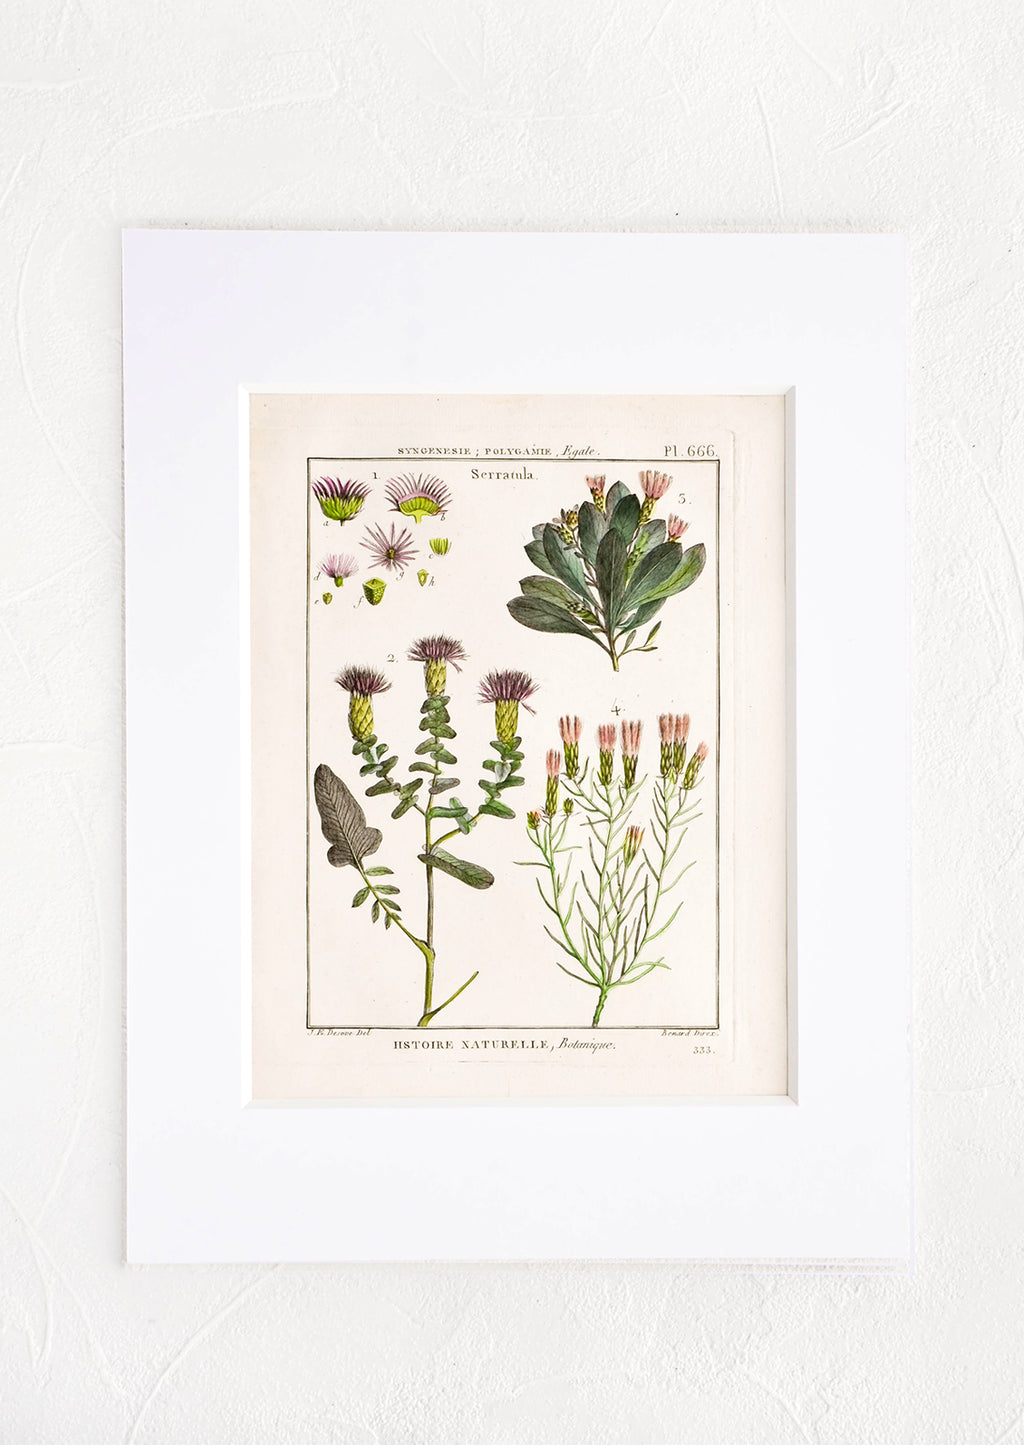 1: Vintage botanical print with white mat. Print features green and pink leaves and flowers.